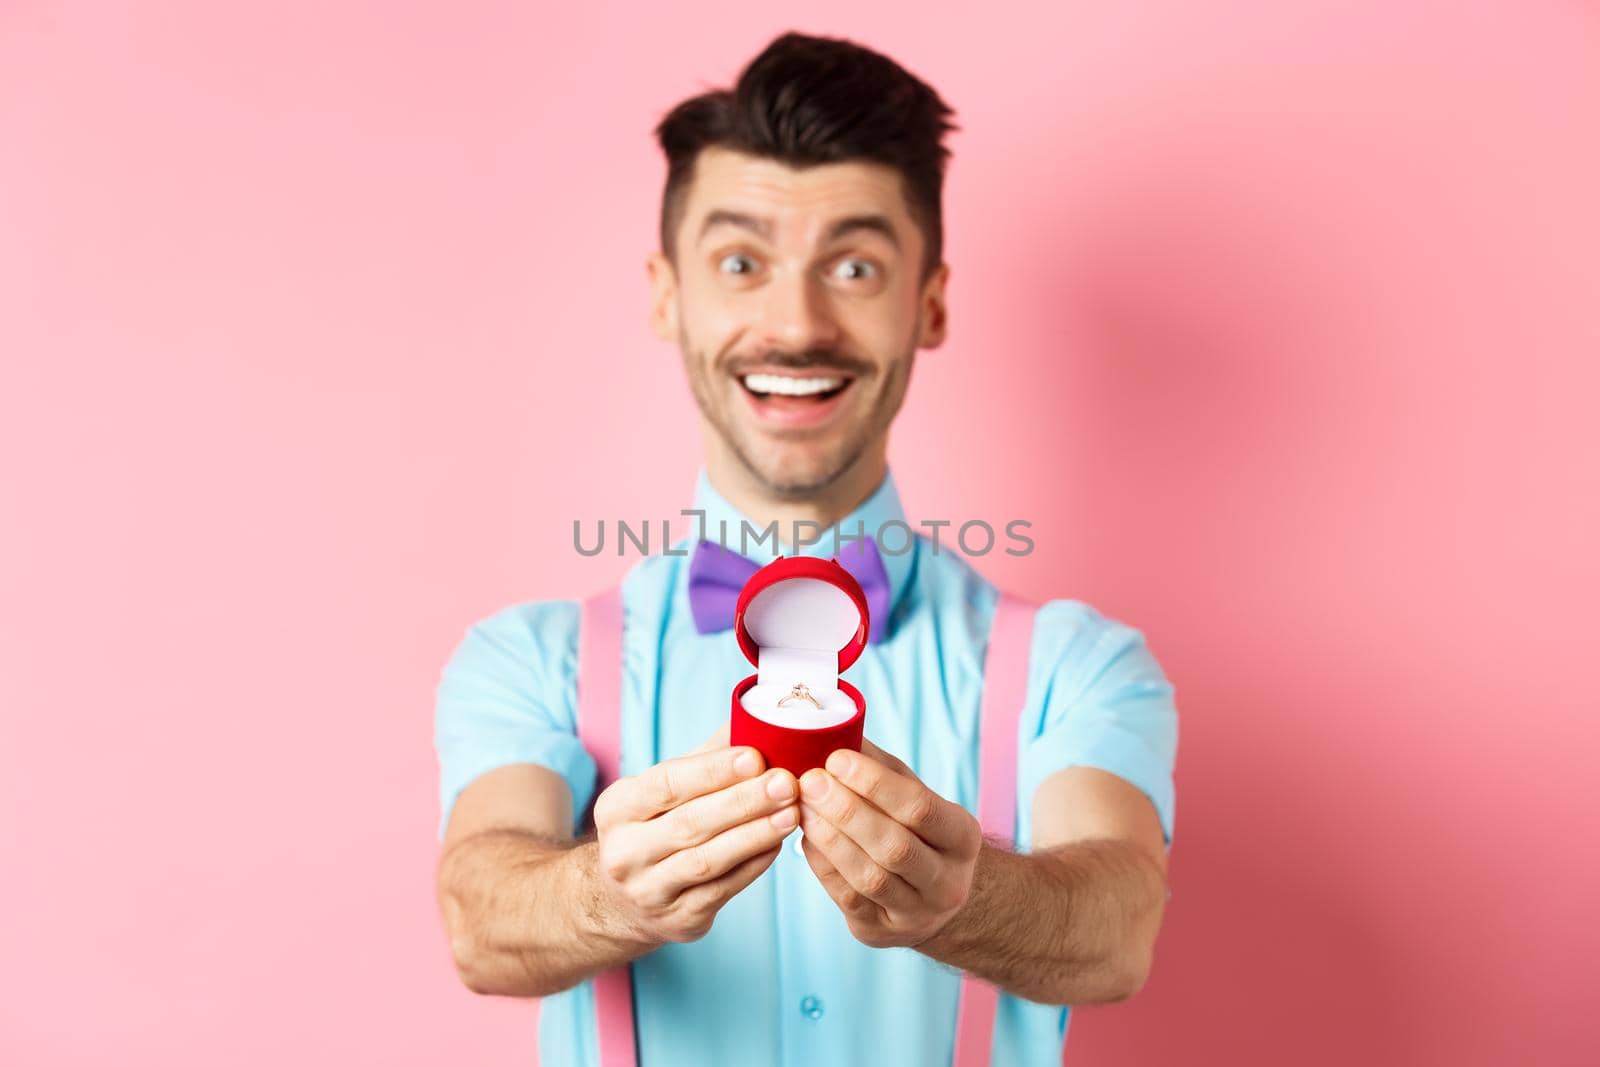 Valentines day. Romantic young man in bow-tie stretch hands with engagement ring and smiling, asking to marry him, making proposal, standing over pink background.